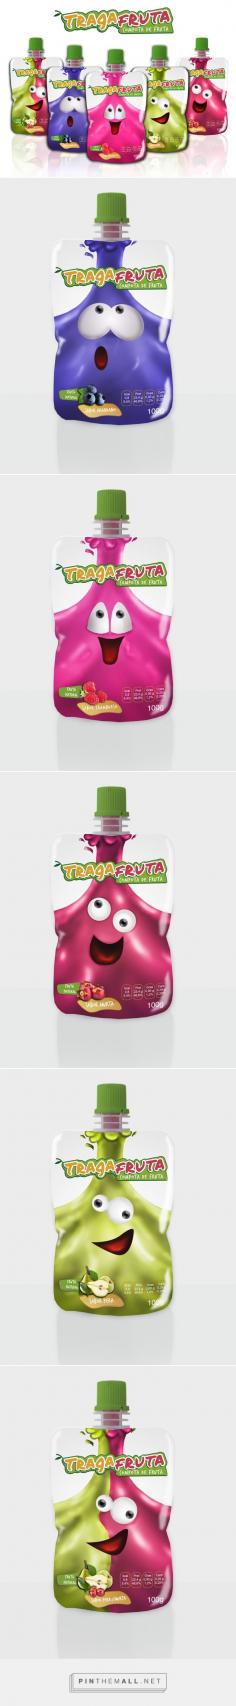 
                    
                        Tragafruta fruit juice on Behance by Natalia Trivelli curated by Packaging Diva PD. Your daily packaging smile : )
                    
                